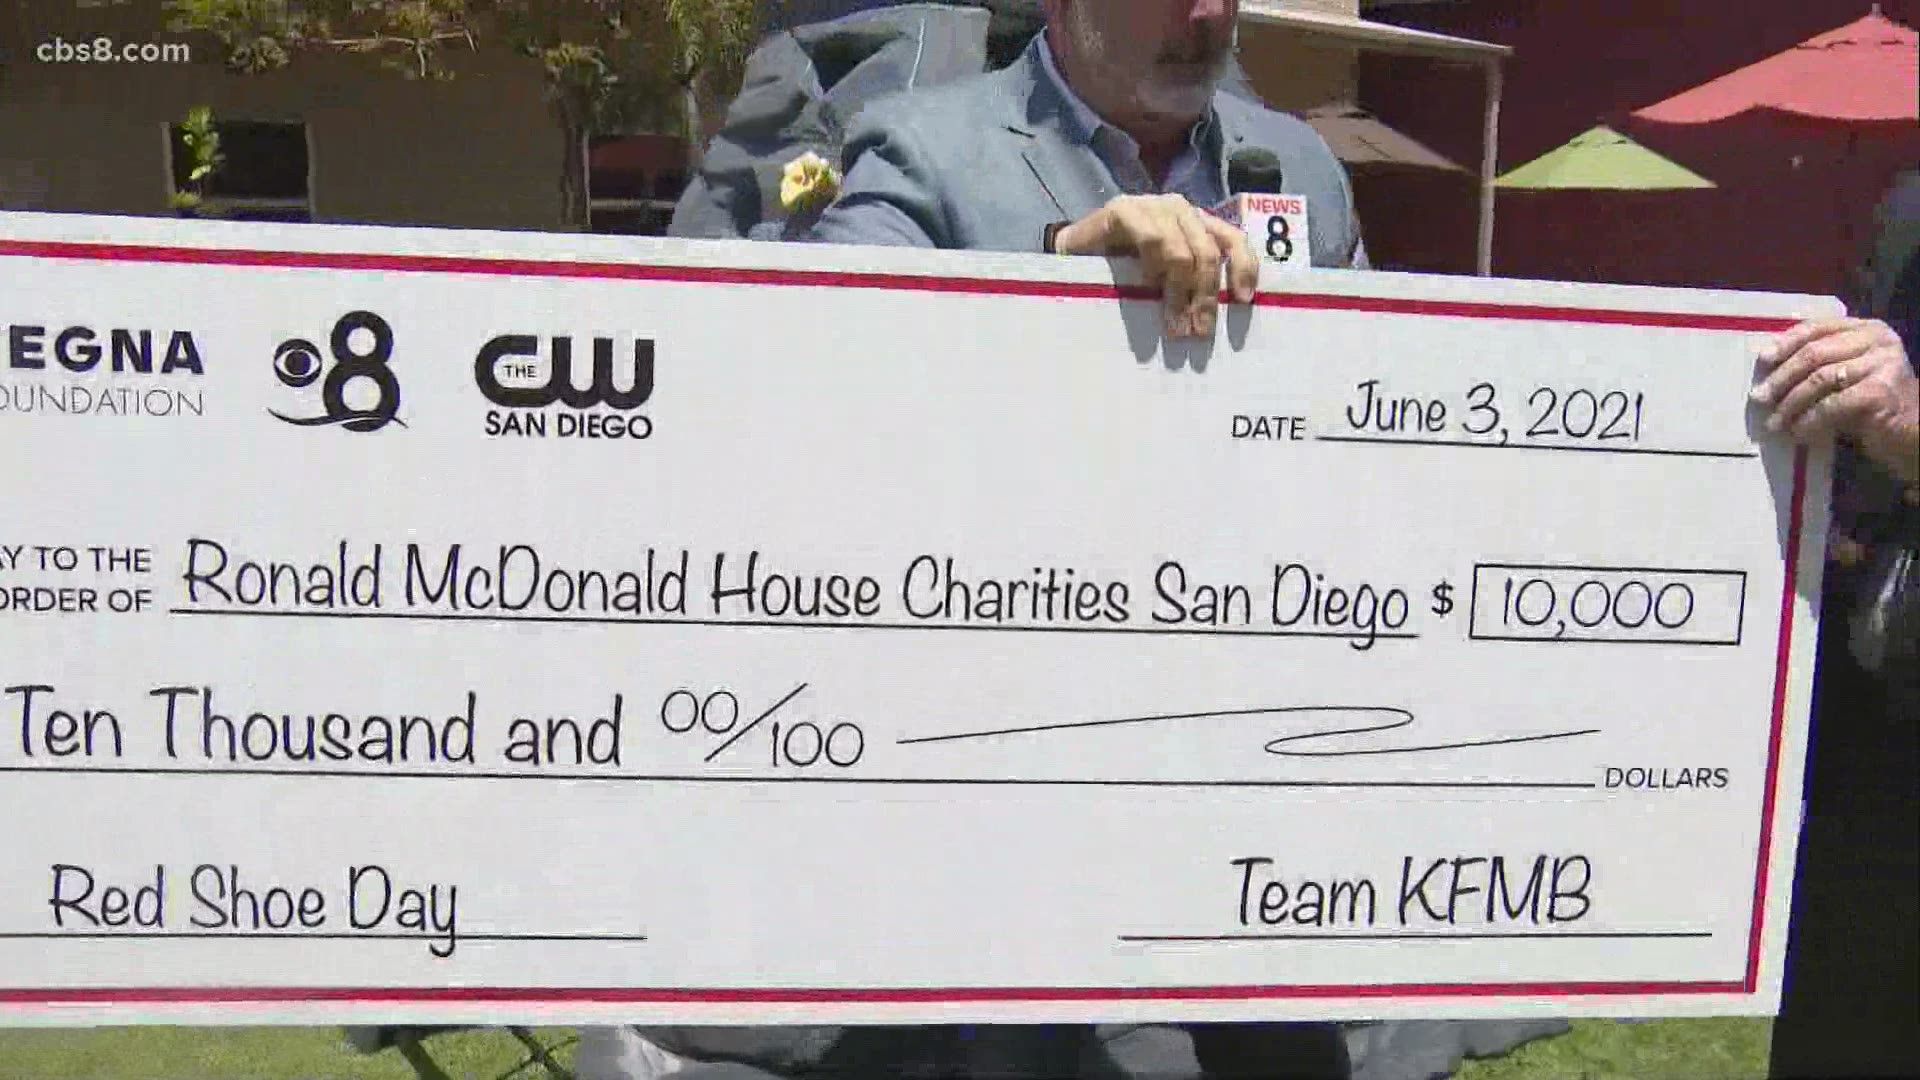 News 8 presented a $10,000 check to Chuck Day and the Ronald McDonald House.